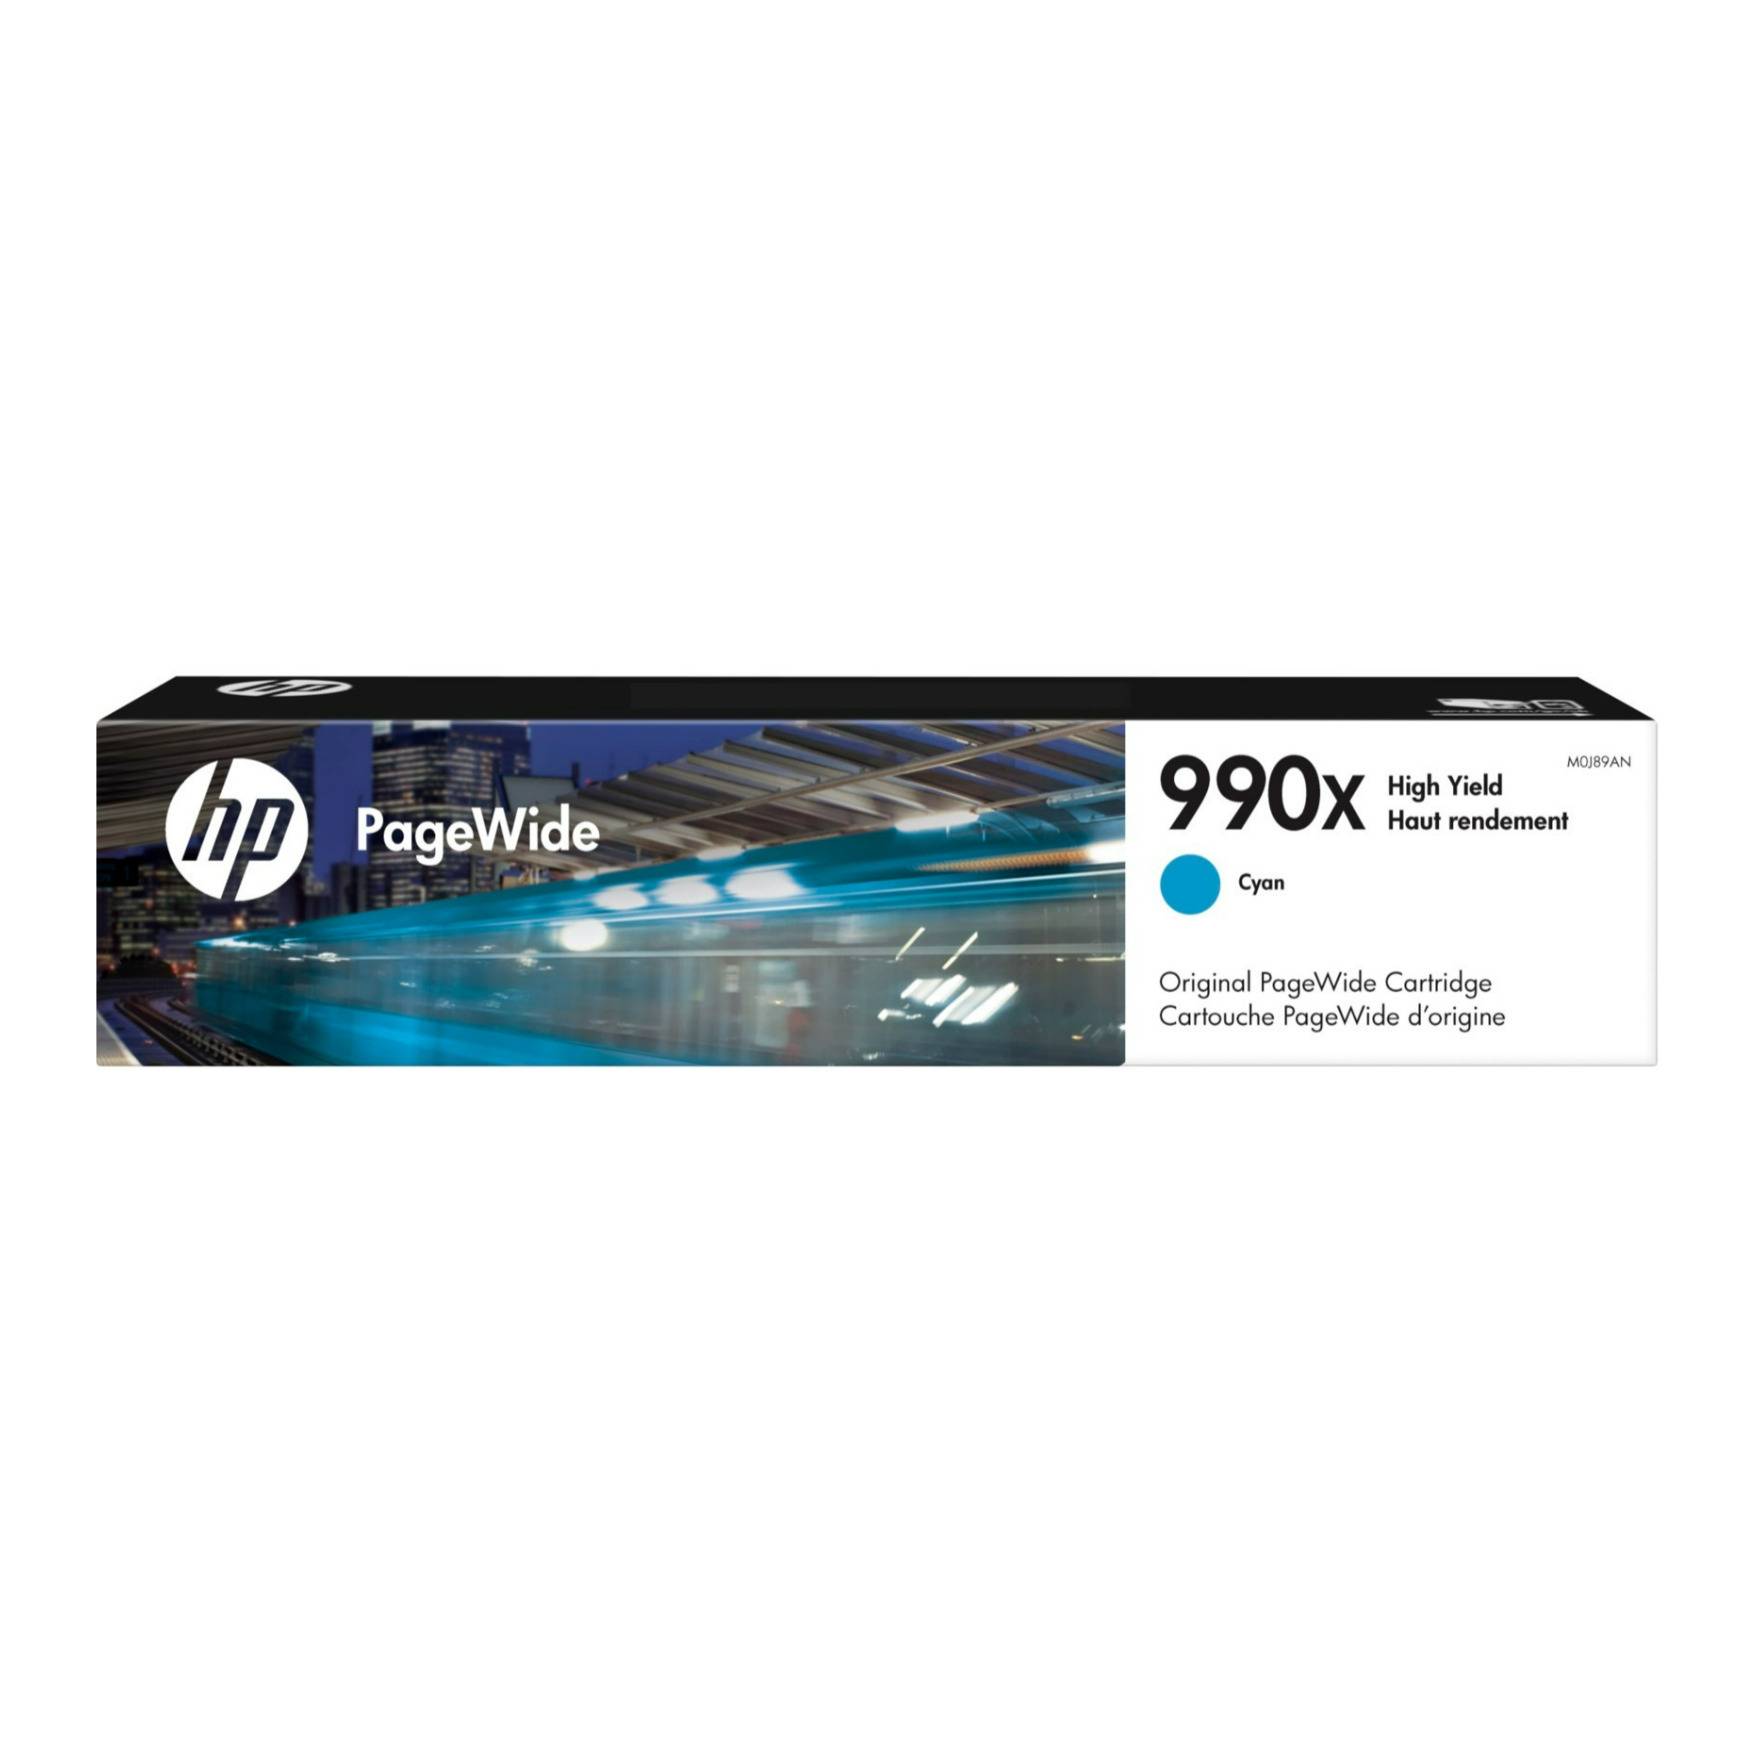 HP 990X High Yield Cyan Original PageWide Cartridge, Easy to Install (16,000 Pages Capacity)